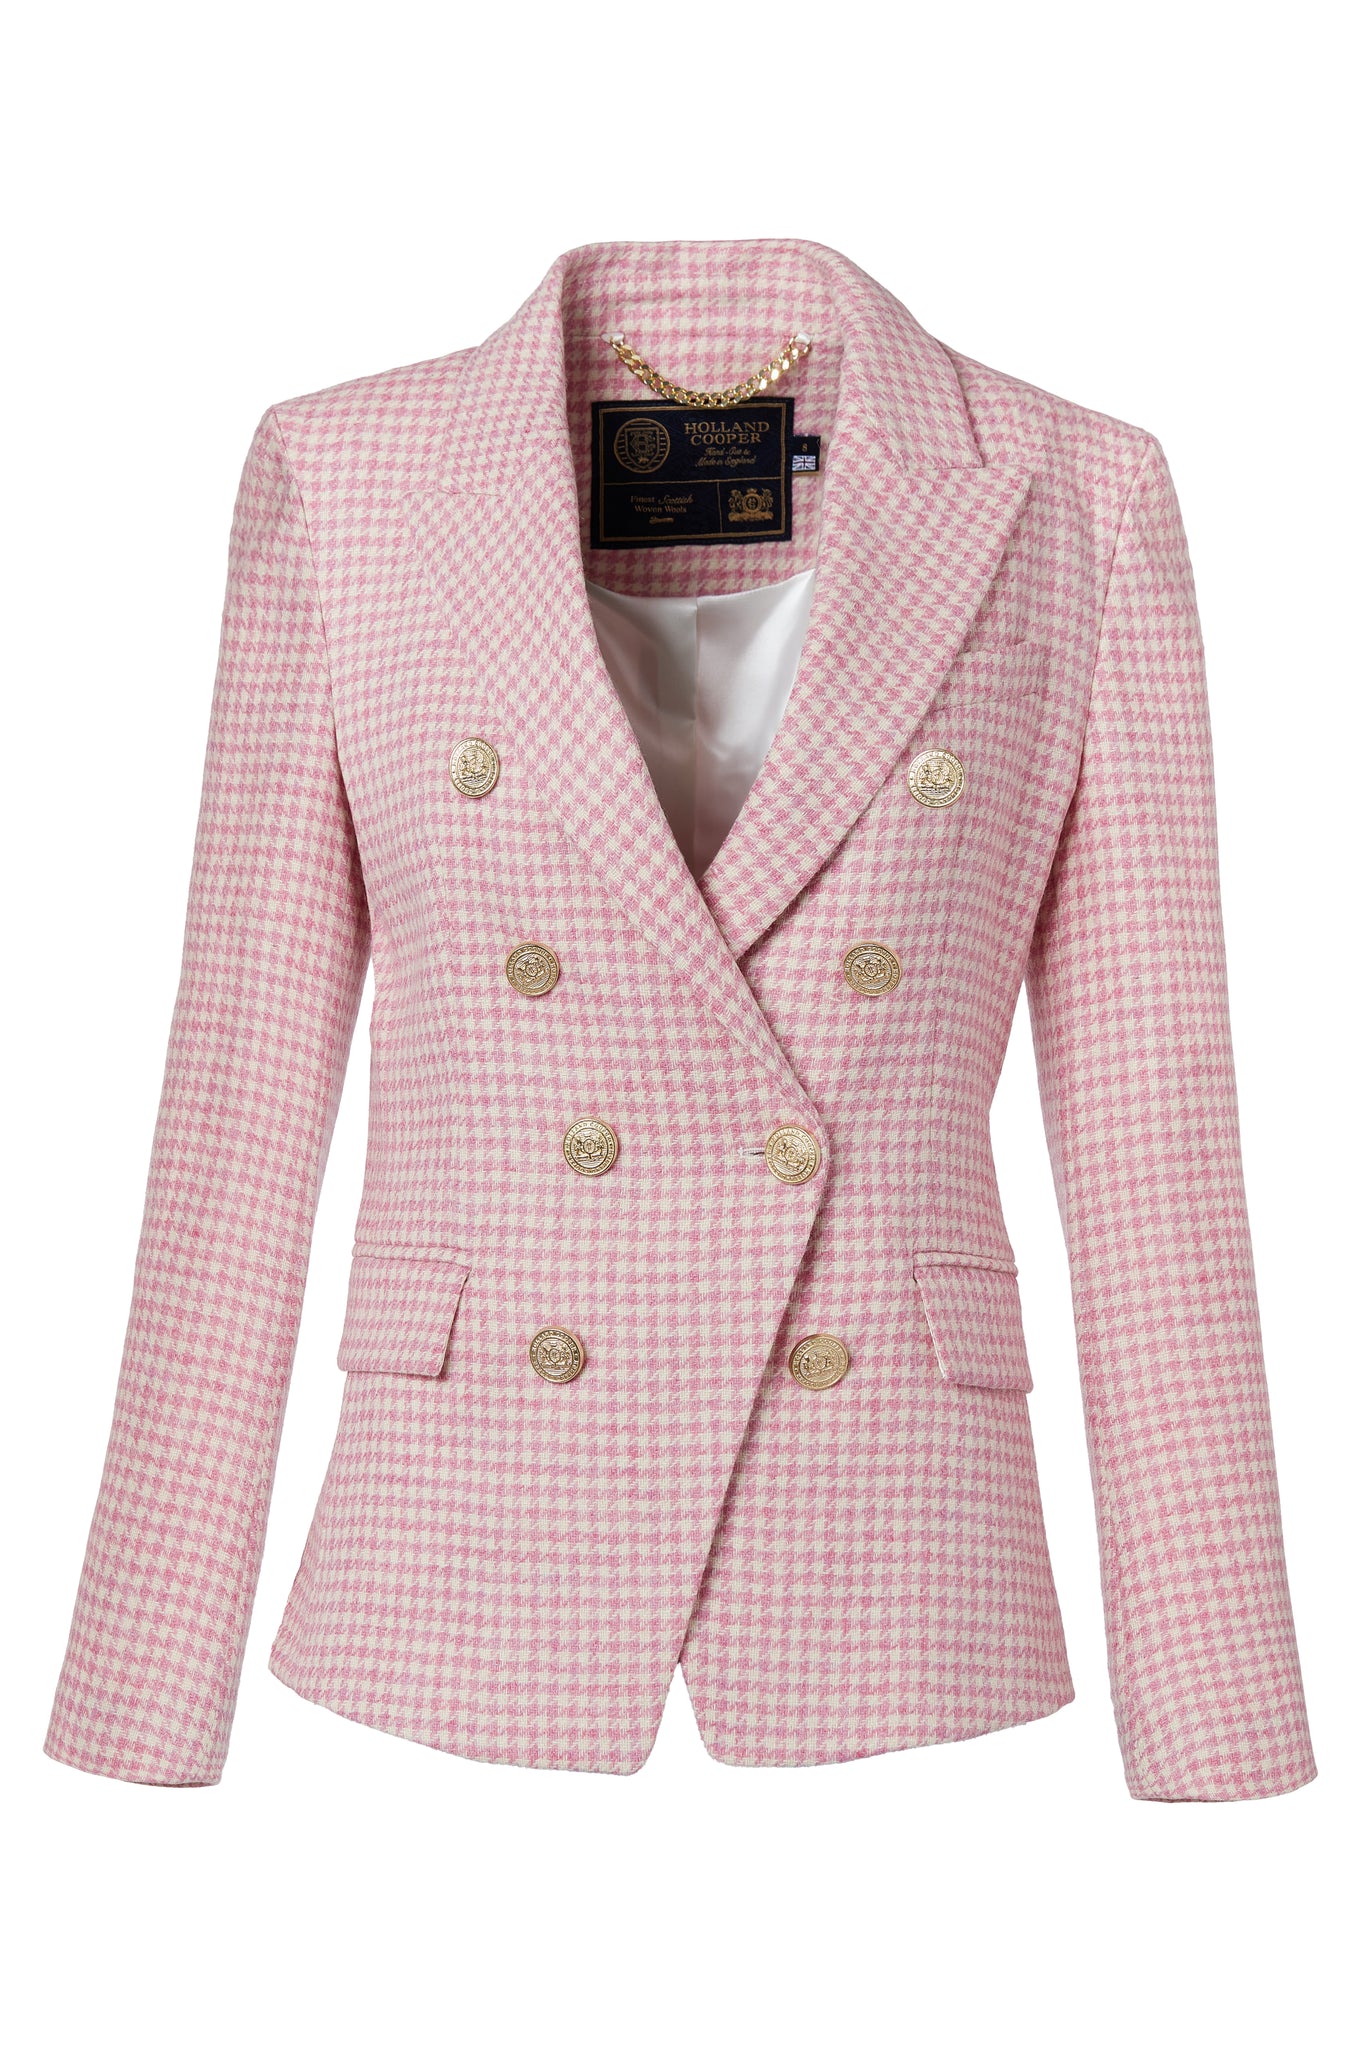 The Light Pink Puppytooth Suit